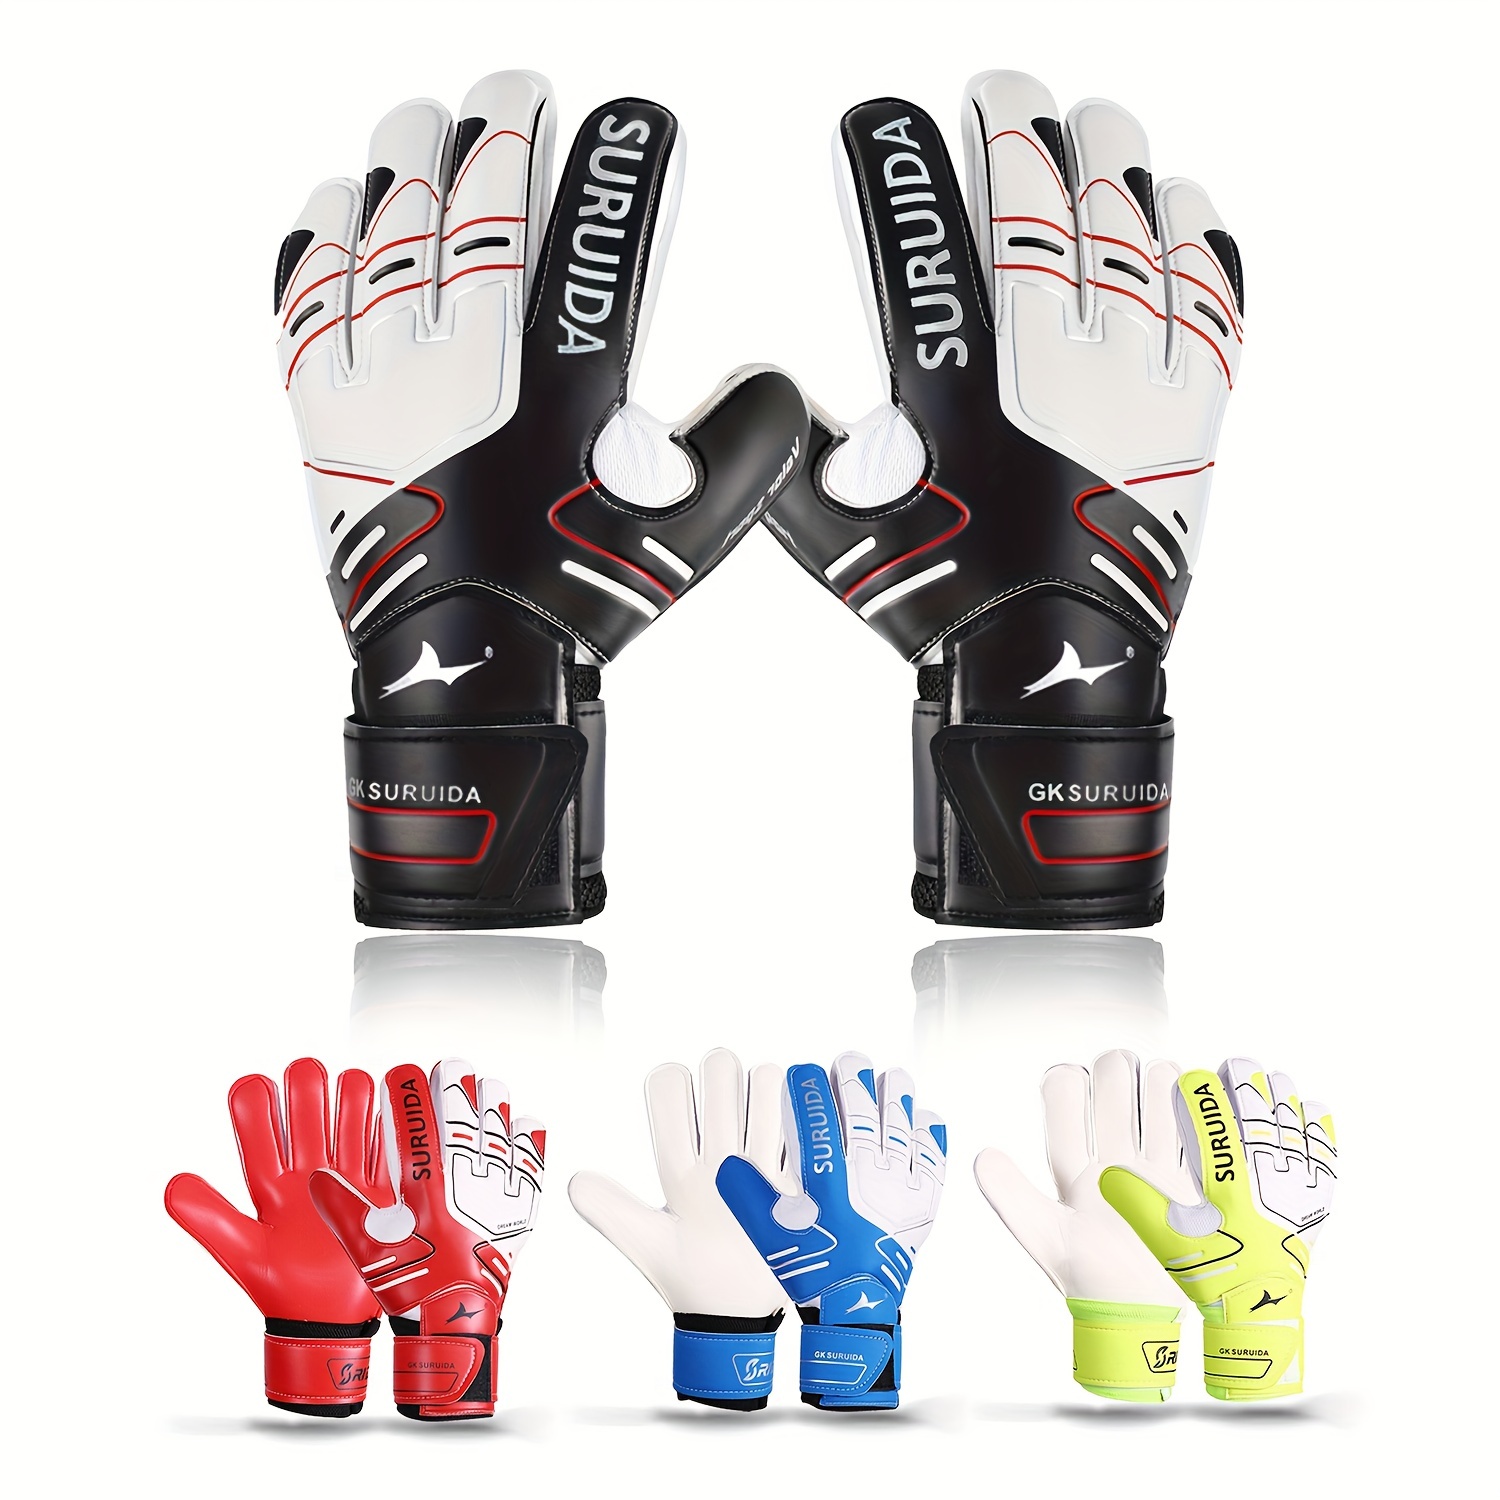  Sportout Youth&Adult Goalie Goalkeeper Gloves,Strong